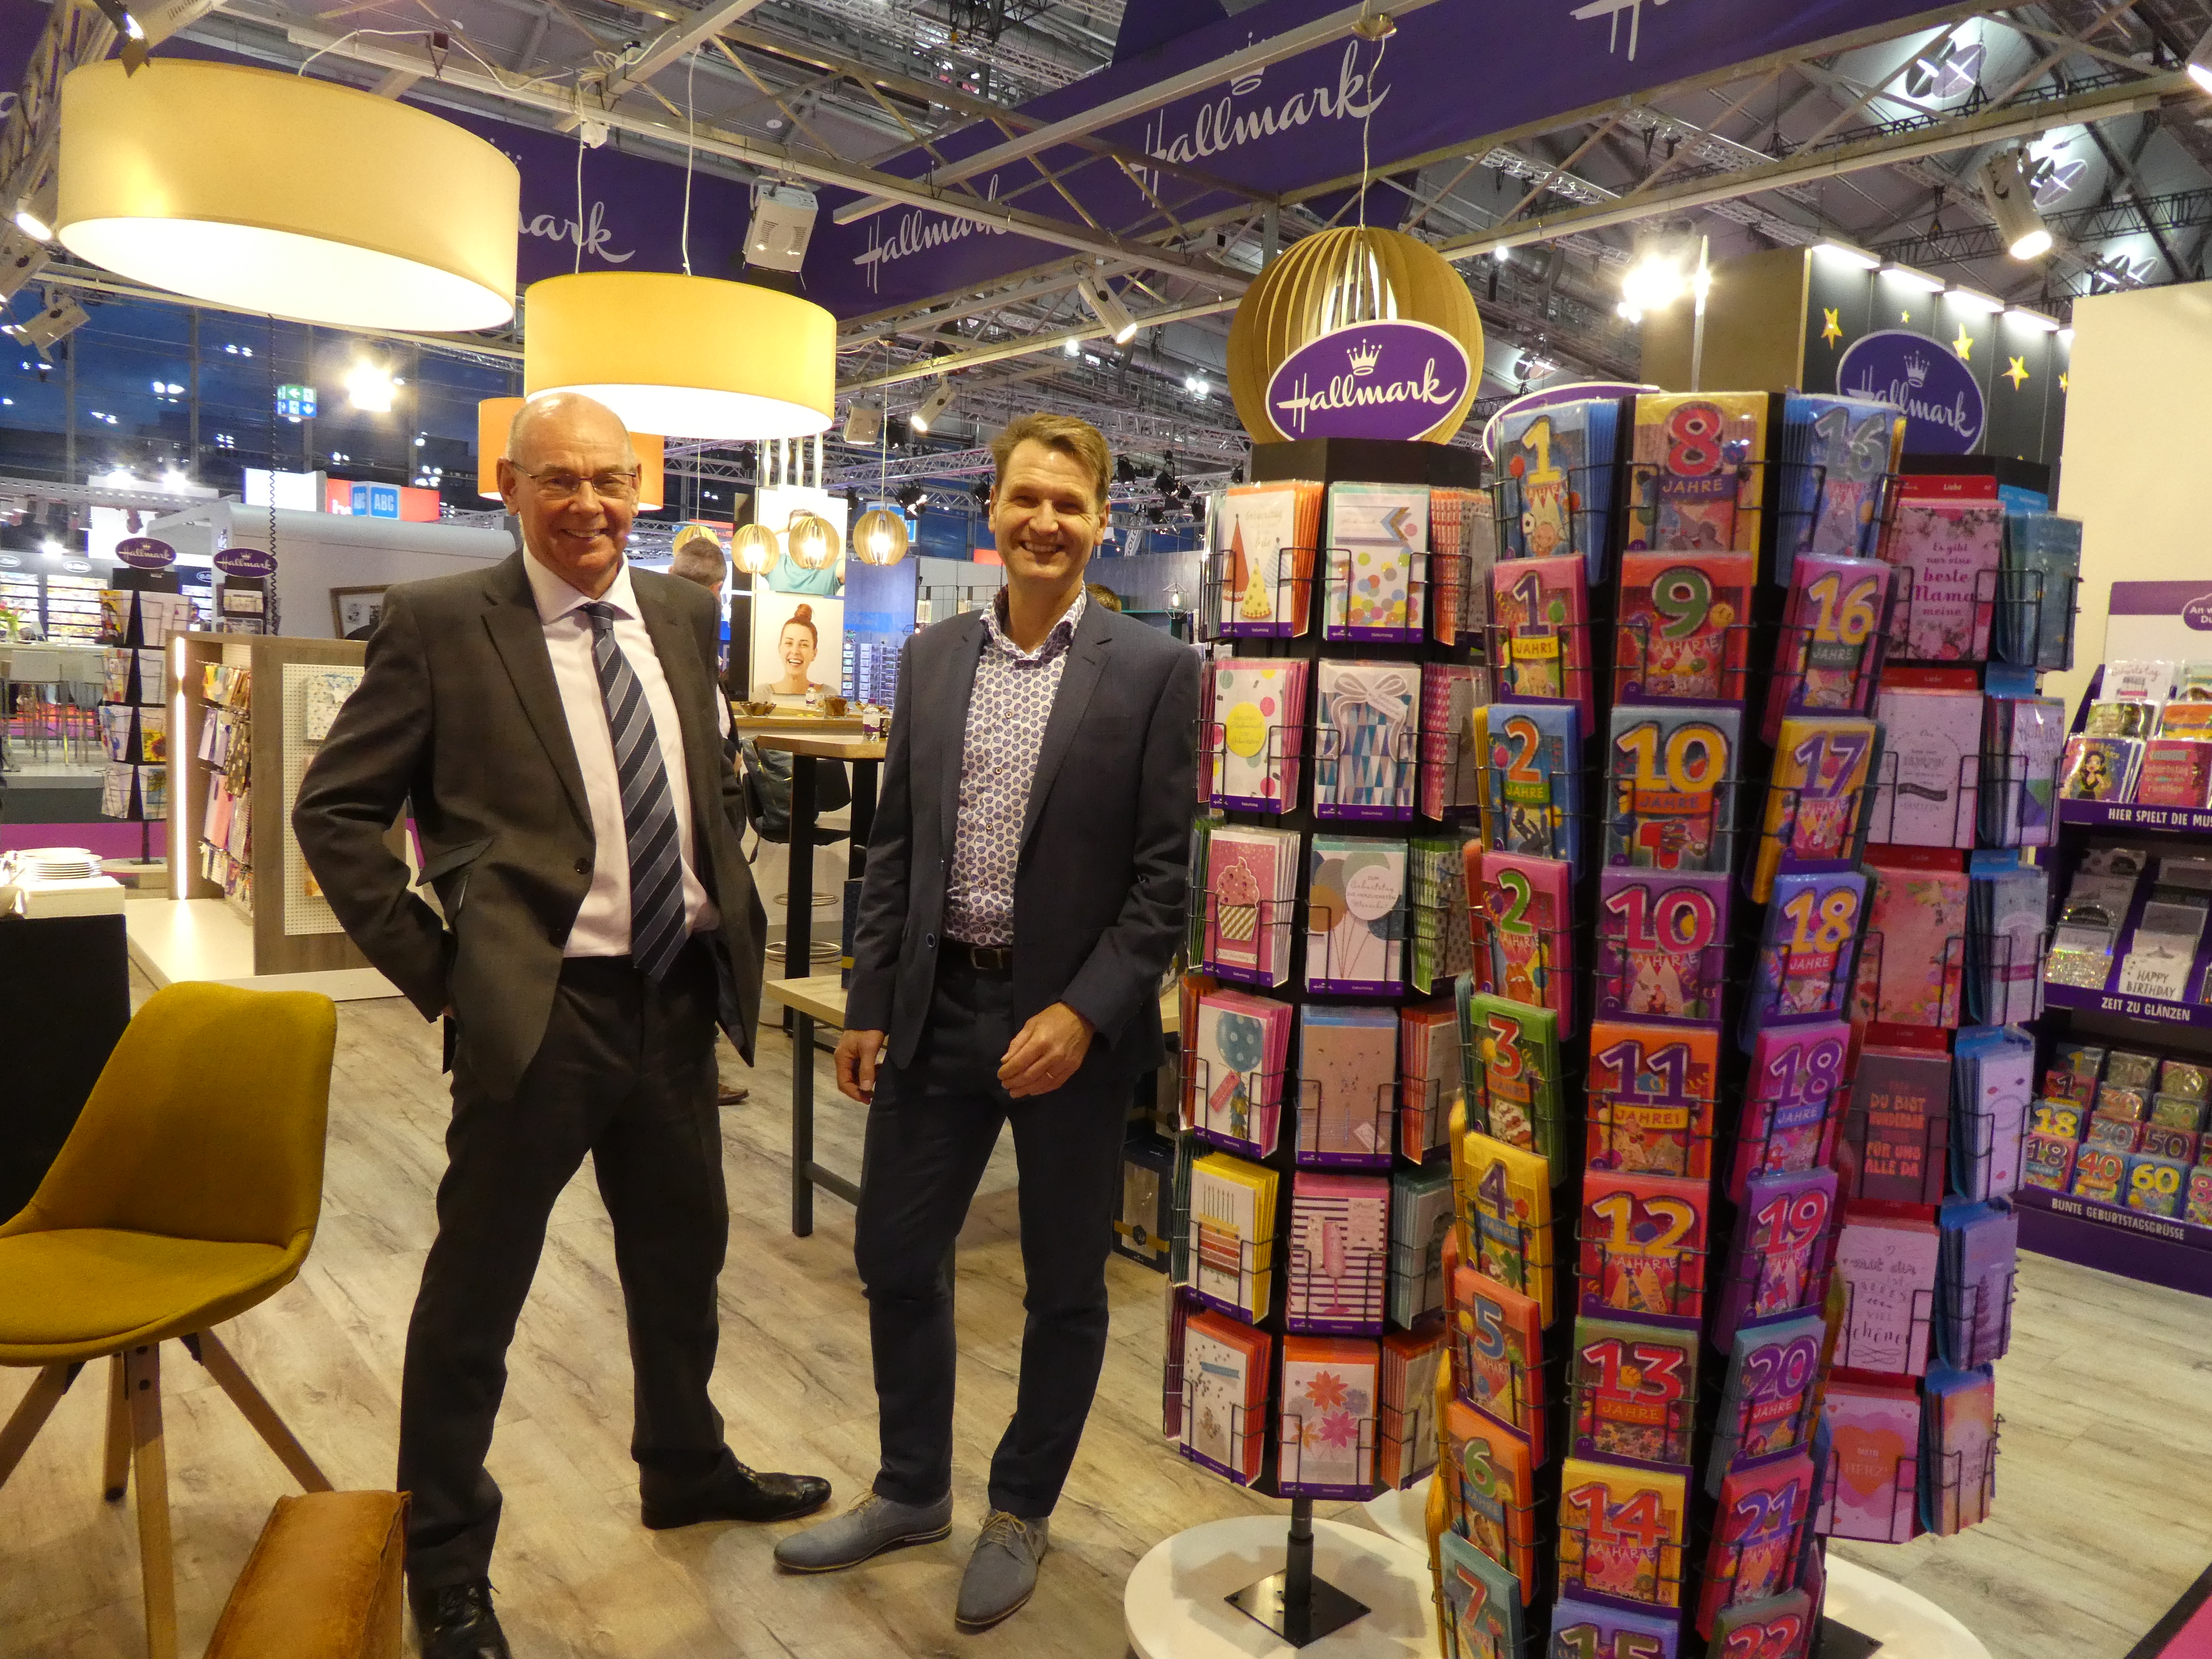 Above: Only a few weeks before he officially retires from Hallmark after 22 years, Steve Wright who has recently relinquished the role of md of Hallmark UK, caught up with Jan Willem-Koch, md of Hallmark Continental Europe. 